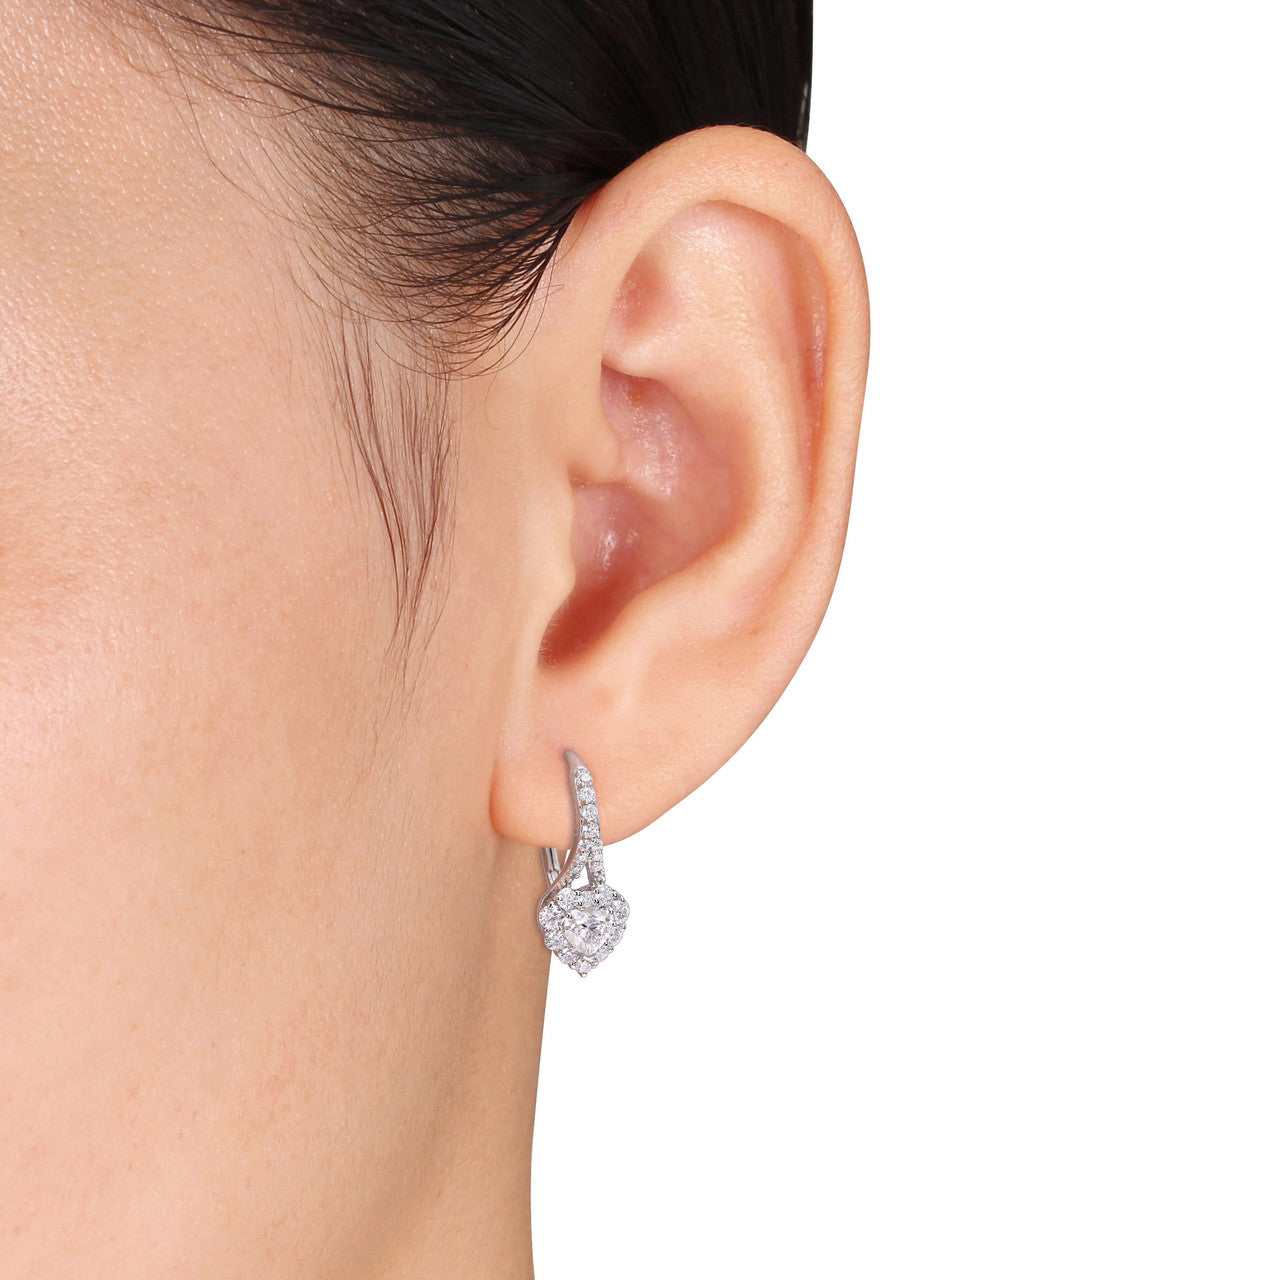 Ice Jewellery 2 CT Created Moissanite-White Halo Dangle Earrings in Sterling Silver - 75000005749 | Ice Jewellery Australia